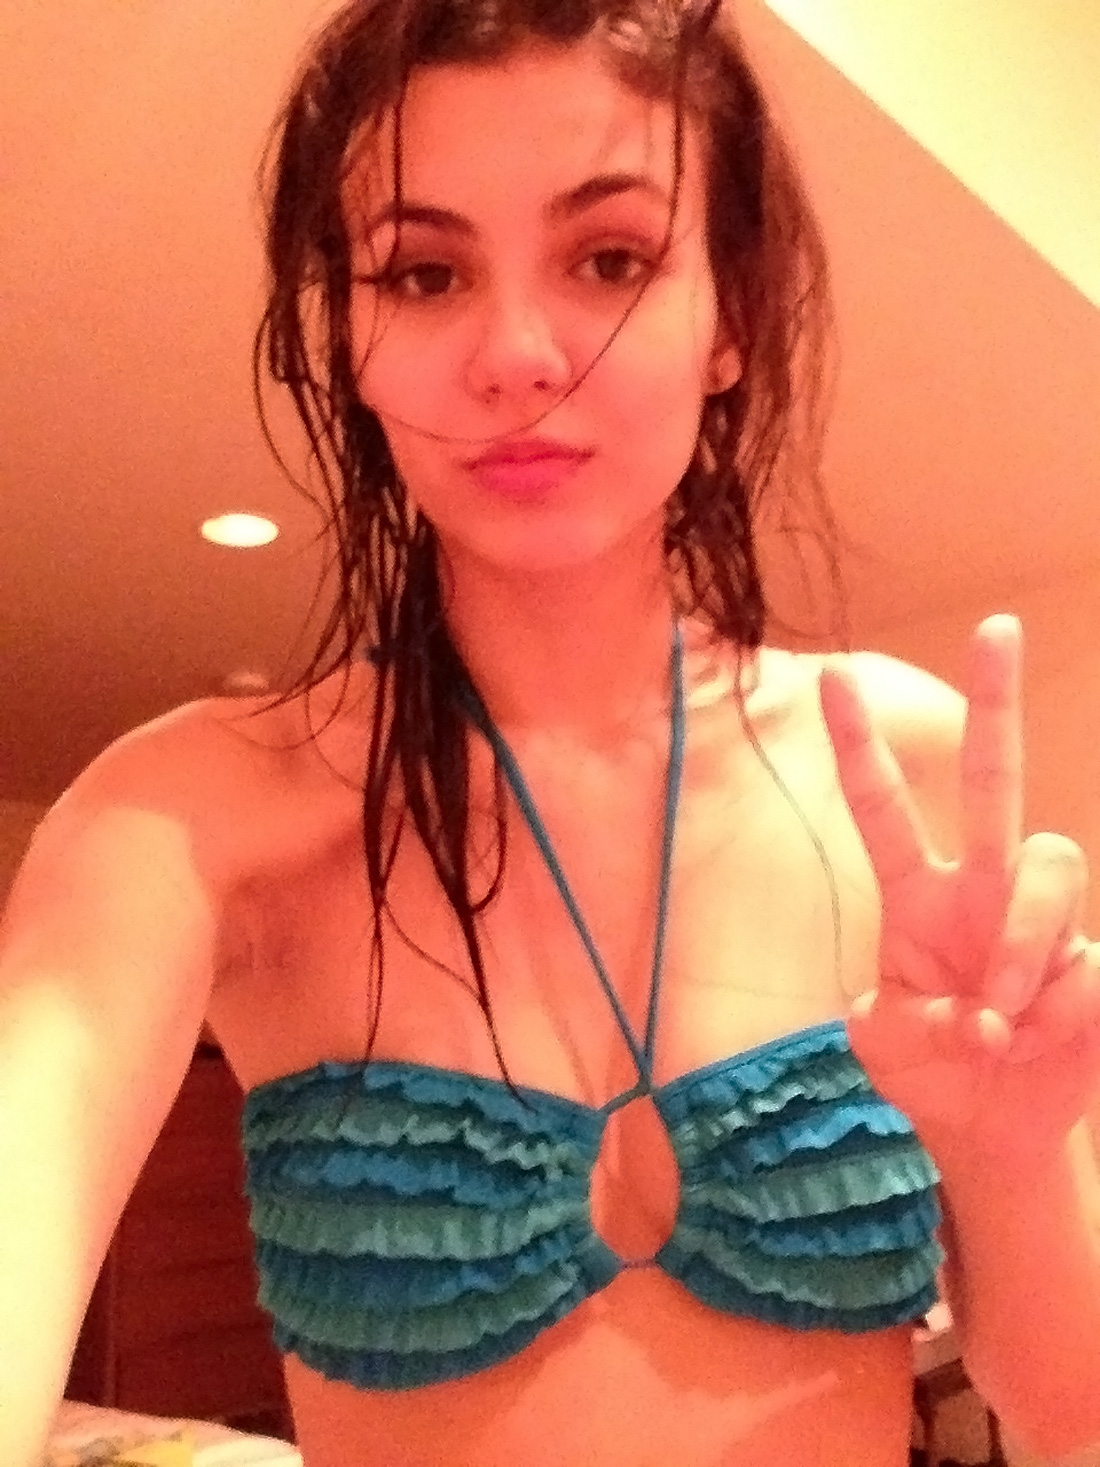 2014 Victoria Justice Porn - Victoria Justice Naked Pics LEAKED - Awesome Nipples